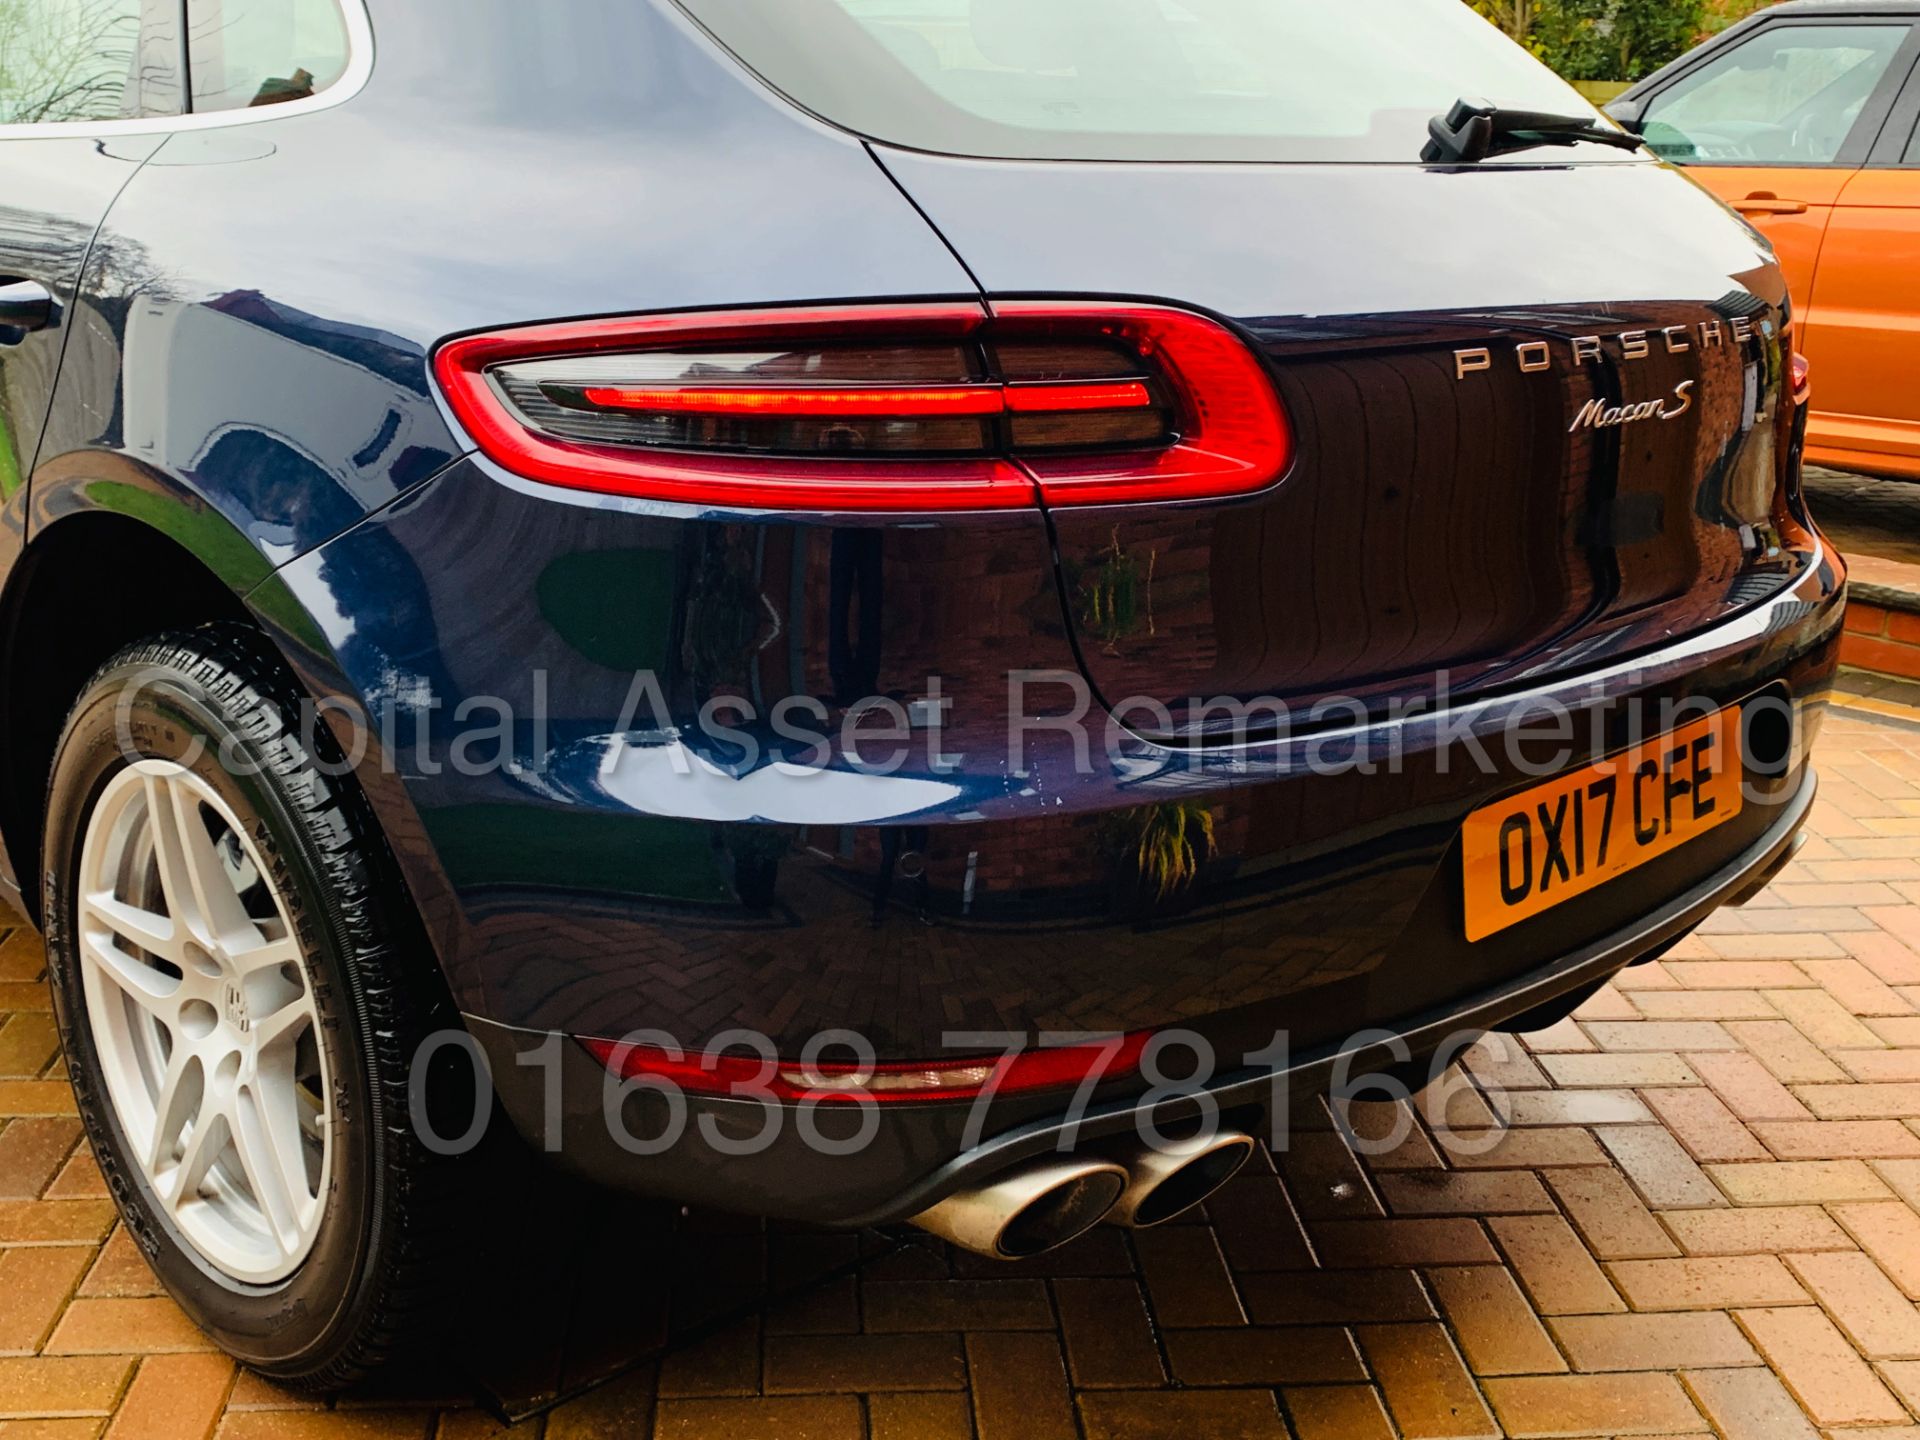 On Sale PORSCHE MACAN S *SPORTS SUV* (2017 - NEW MODEL) '3.0 V6 DIESEL - 258 BHP - PDK AUTO' * WOW* - Image 17 of 71